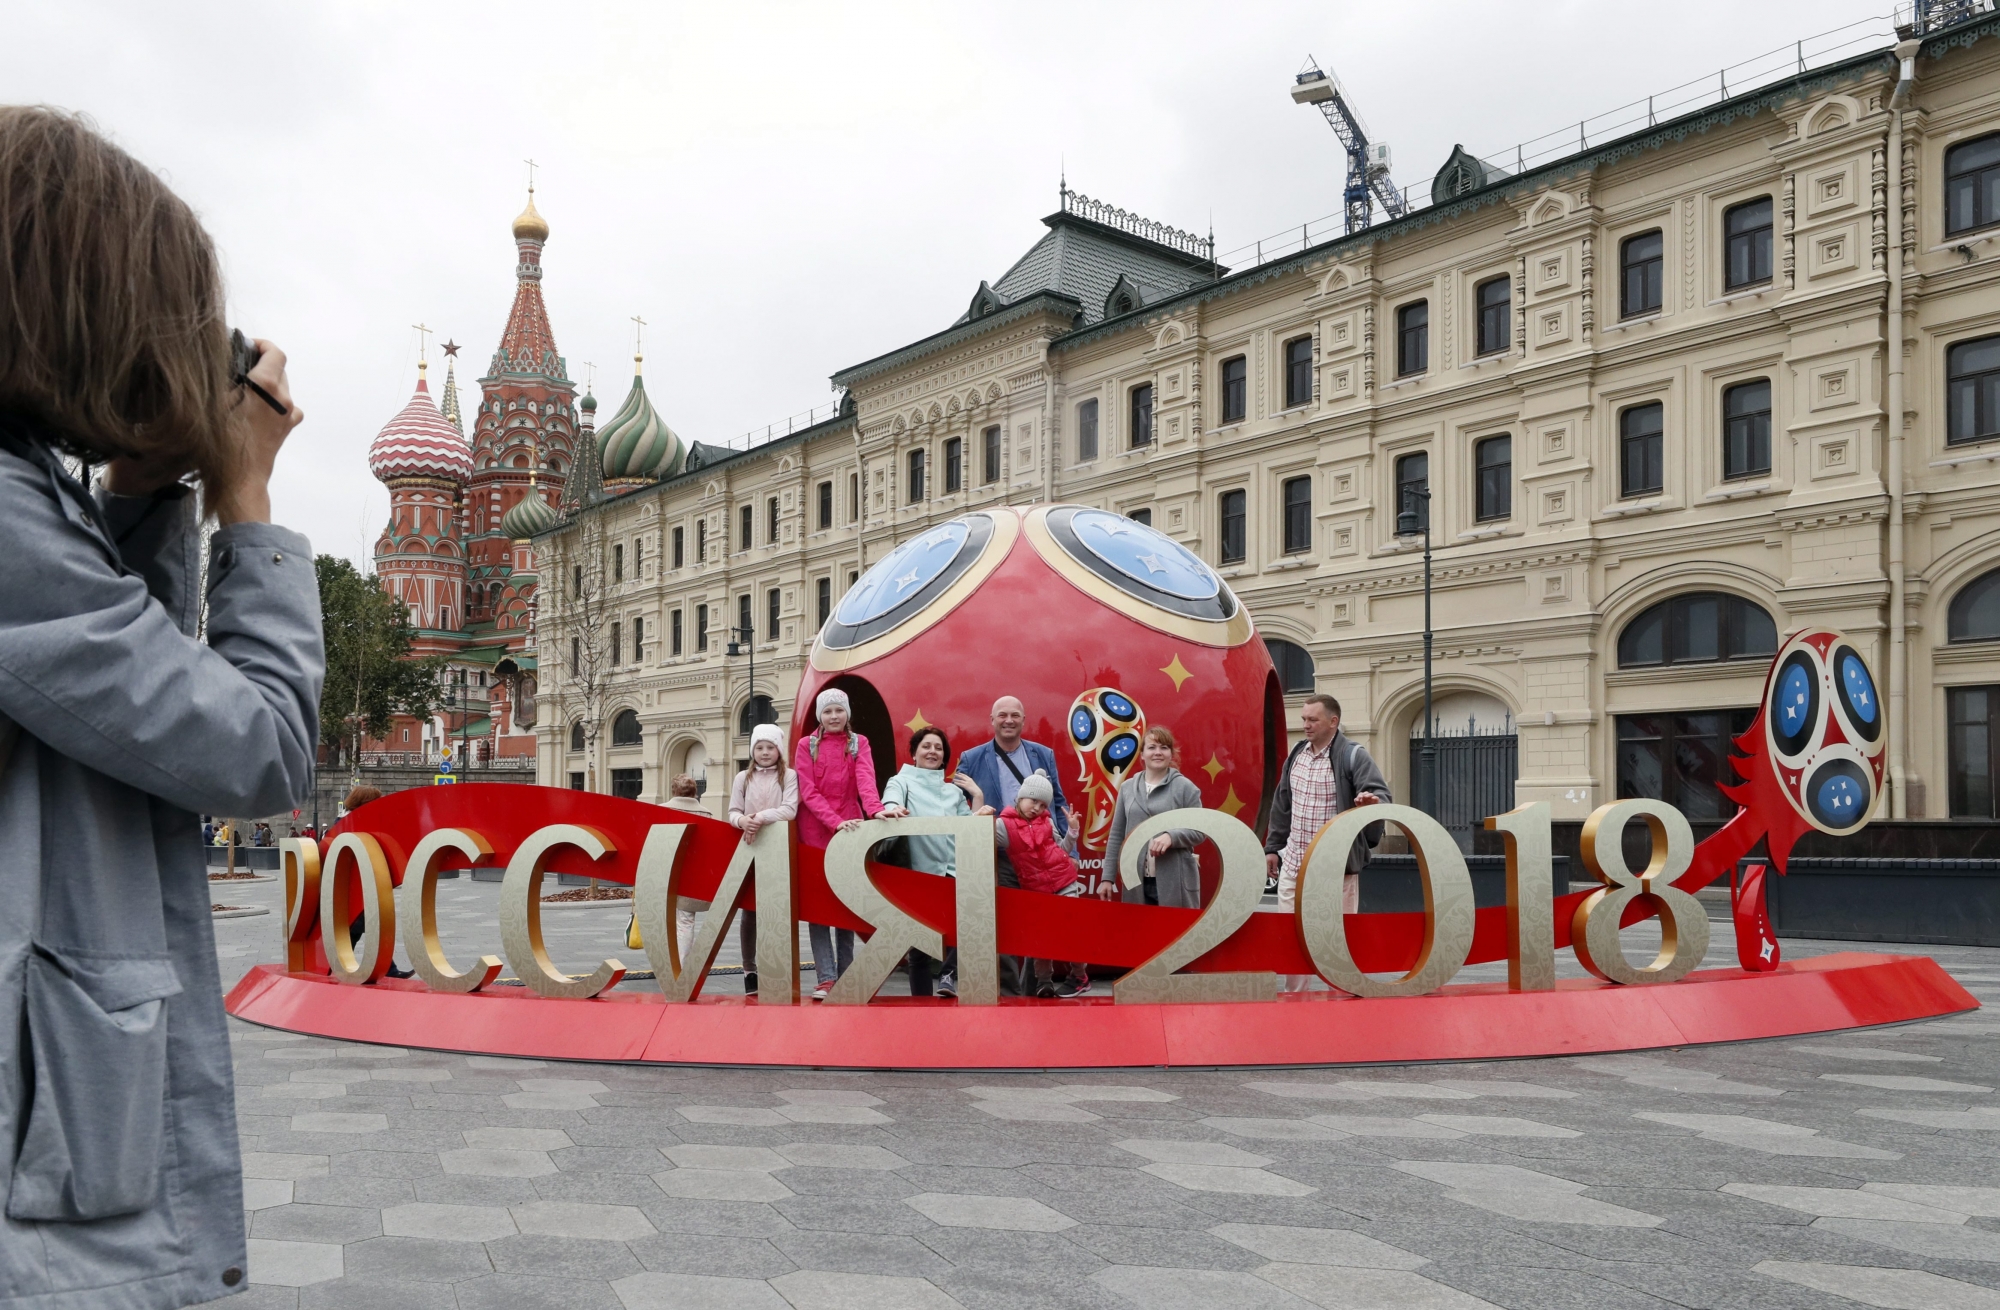 epa06793781 A view of a FIFA World Cup 2018 art installation in Moscow, Russia, 08 June 2018. The FIFA World Cup 2018 will take place in Russia from 14 June until 15 July 2018.  EPA/MAXIM SHIPENKOV RUSSIA SOCCER FIFA WORLD CUP 2018